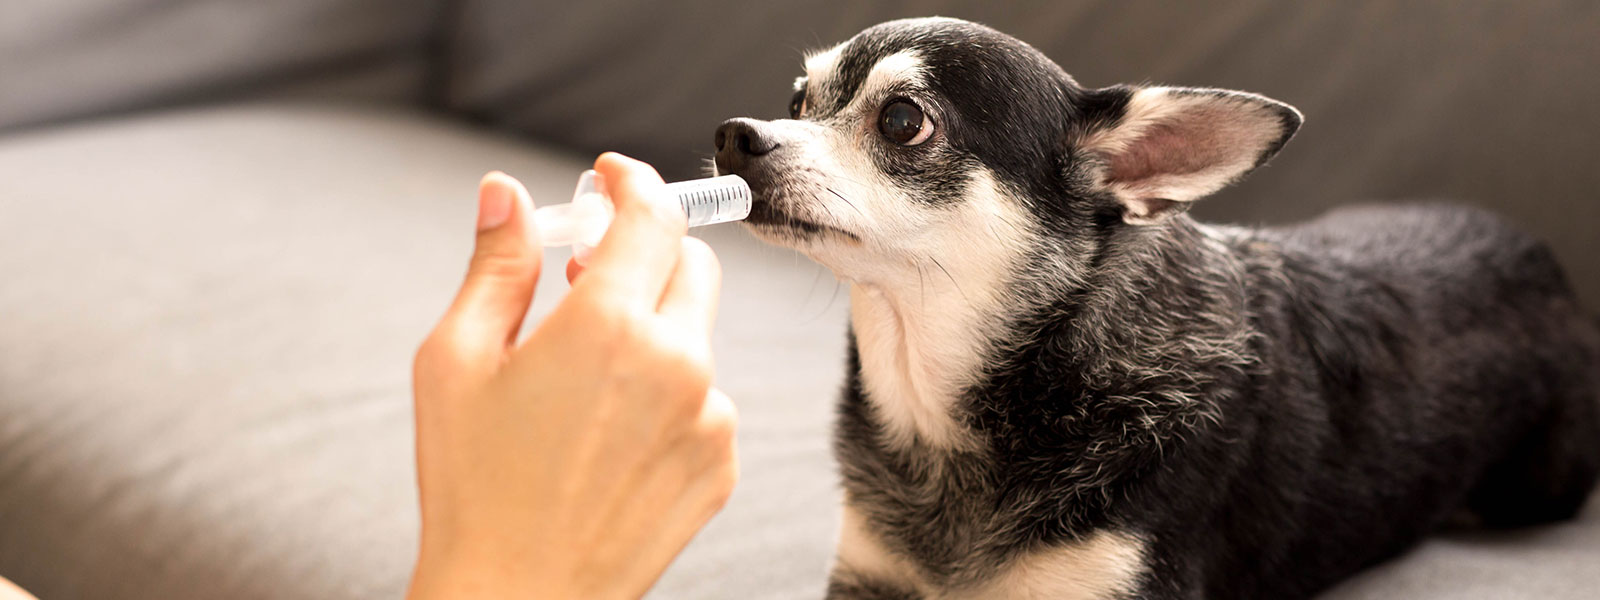 Tips and Tricks for Getting Pets to Take Their Medicine